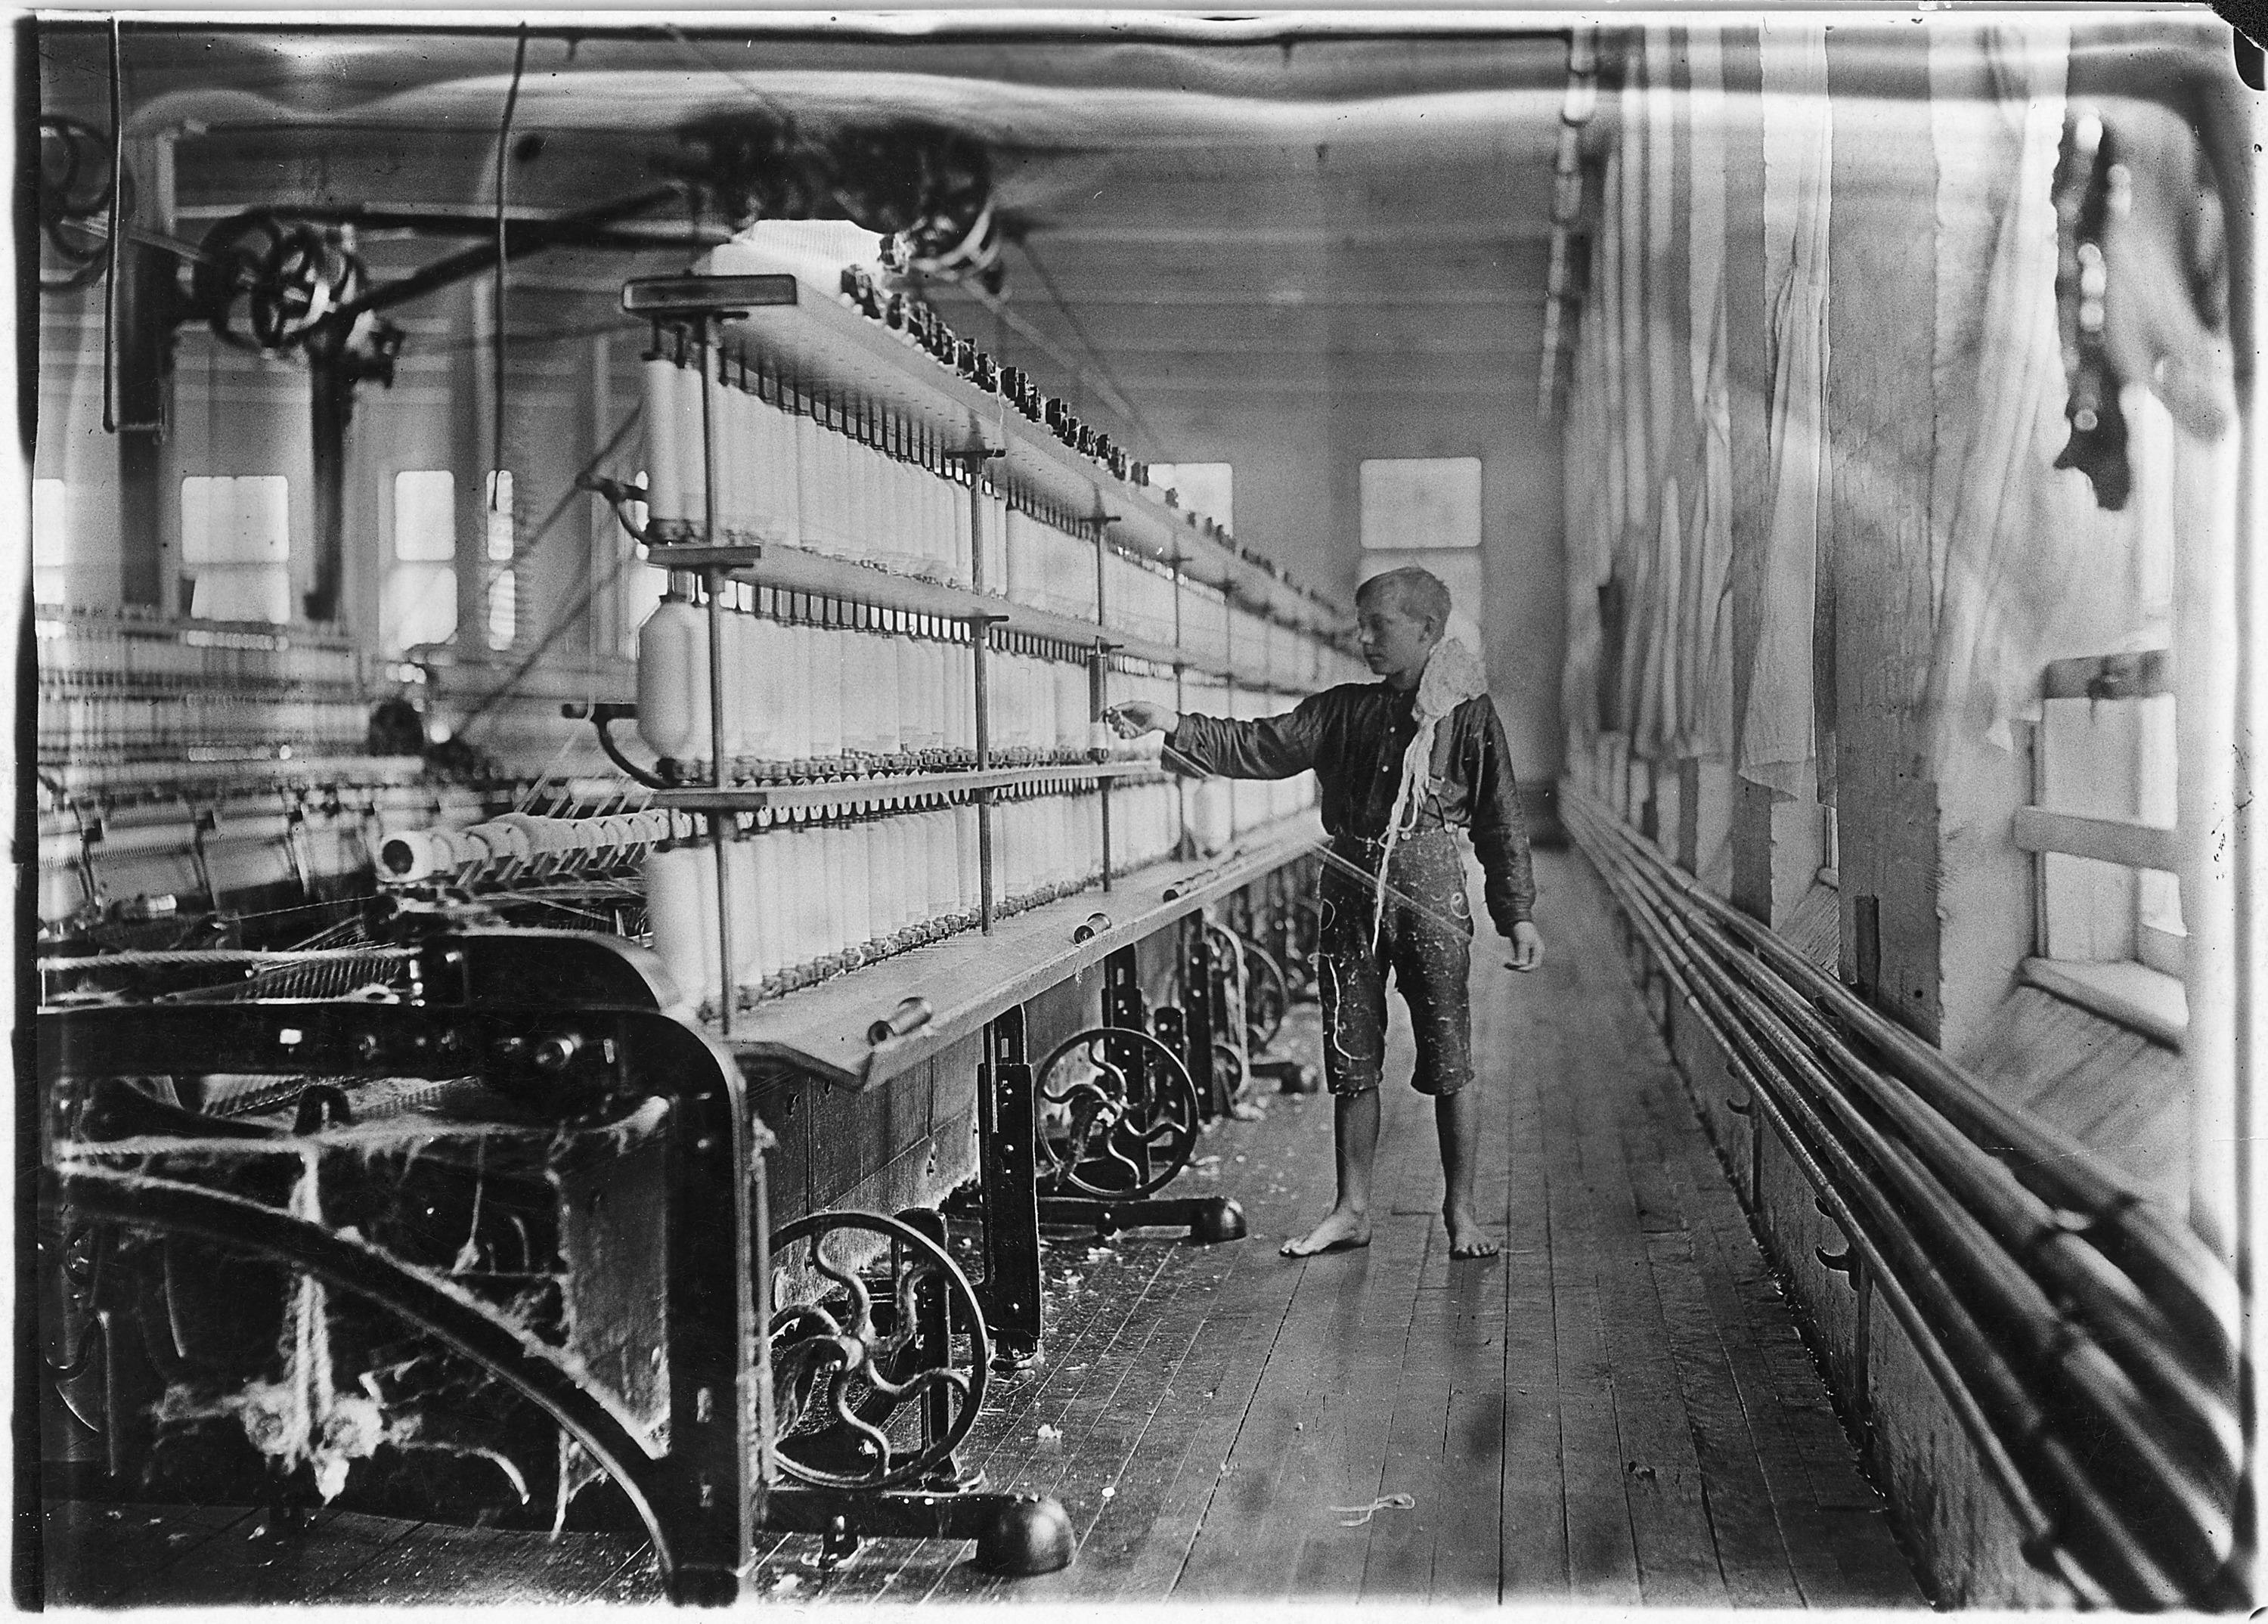 Mule-spinning room in Chace Cotton Mill. Raoul Julien a 